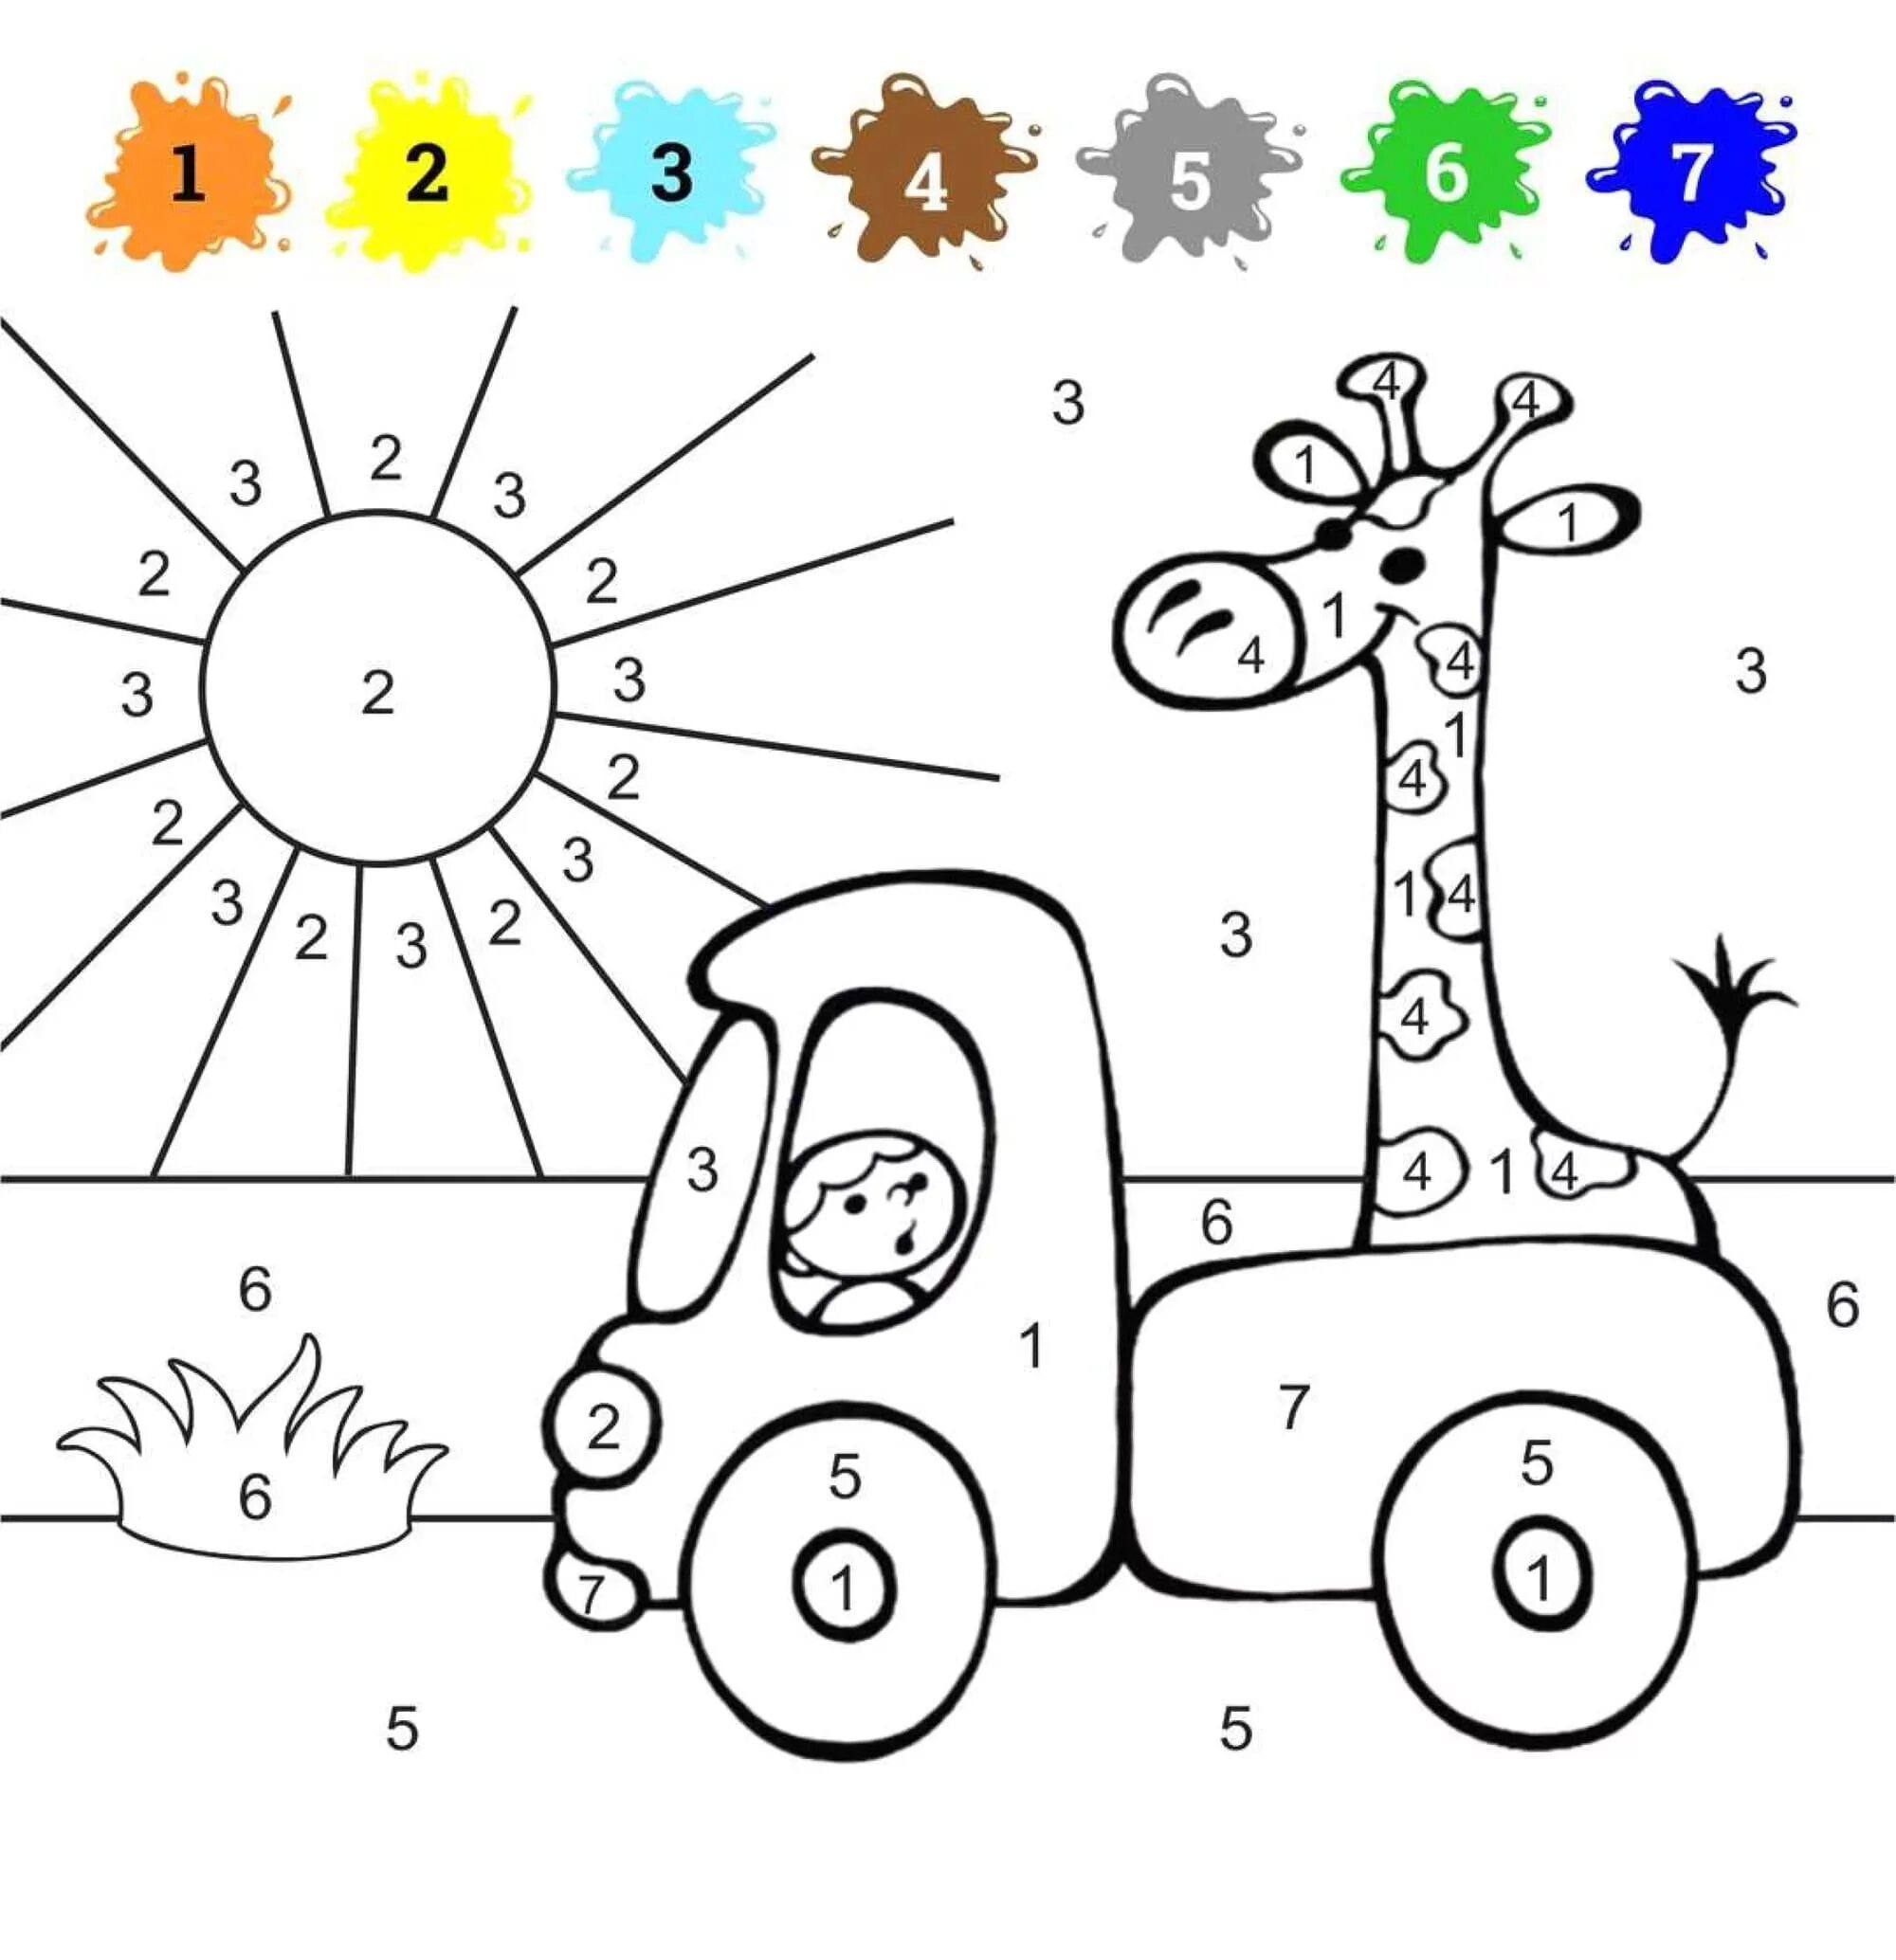 By numbers for kids game #13